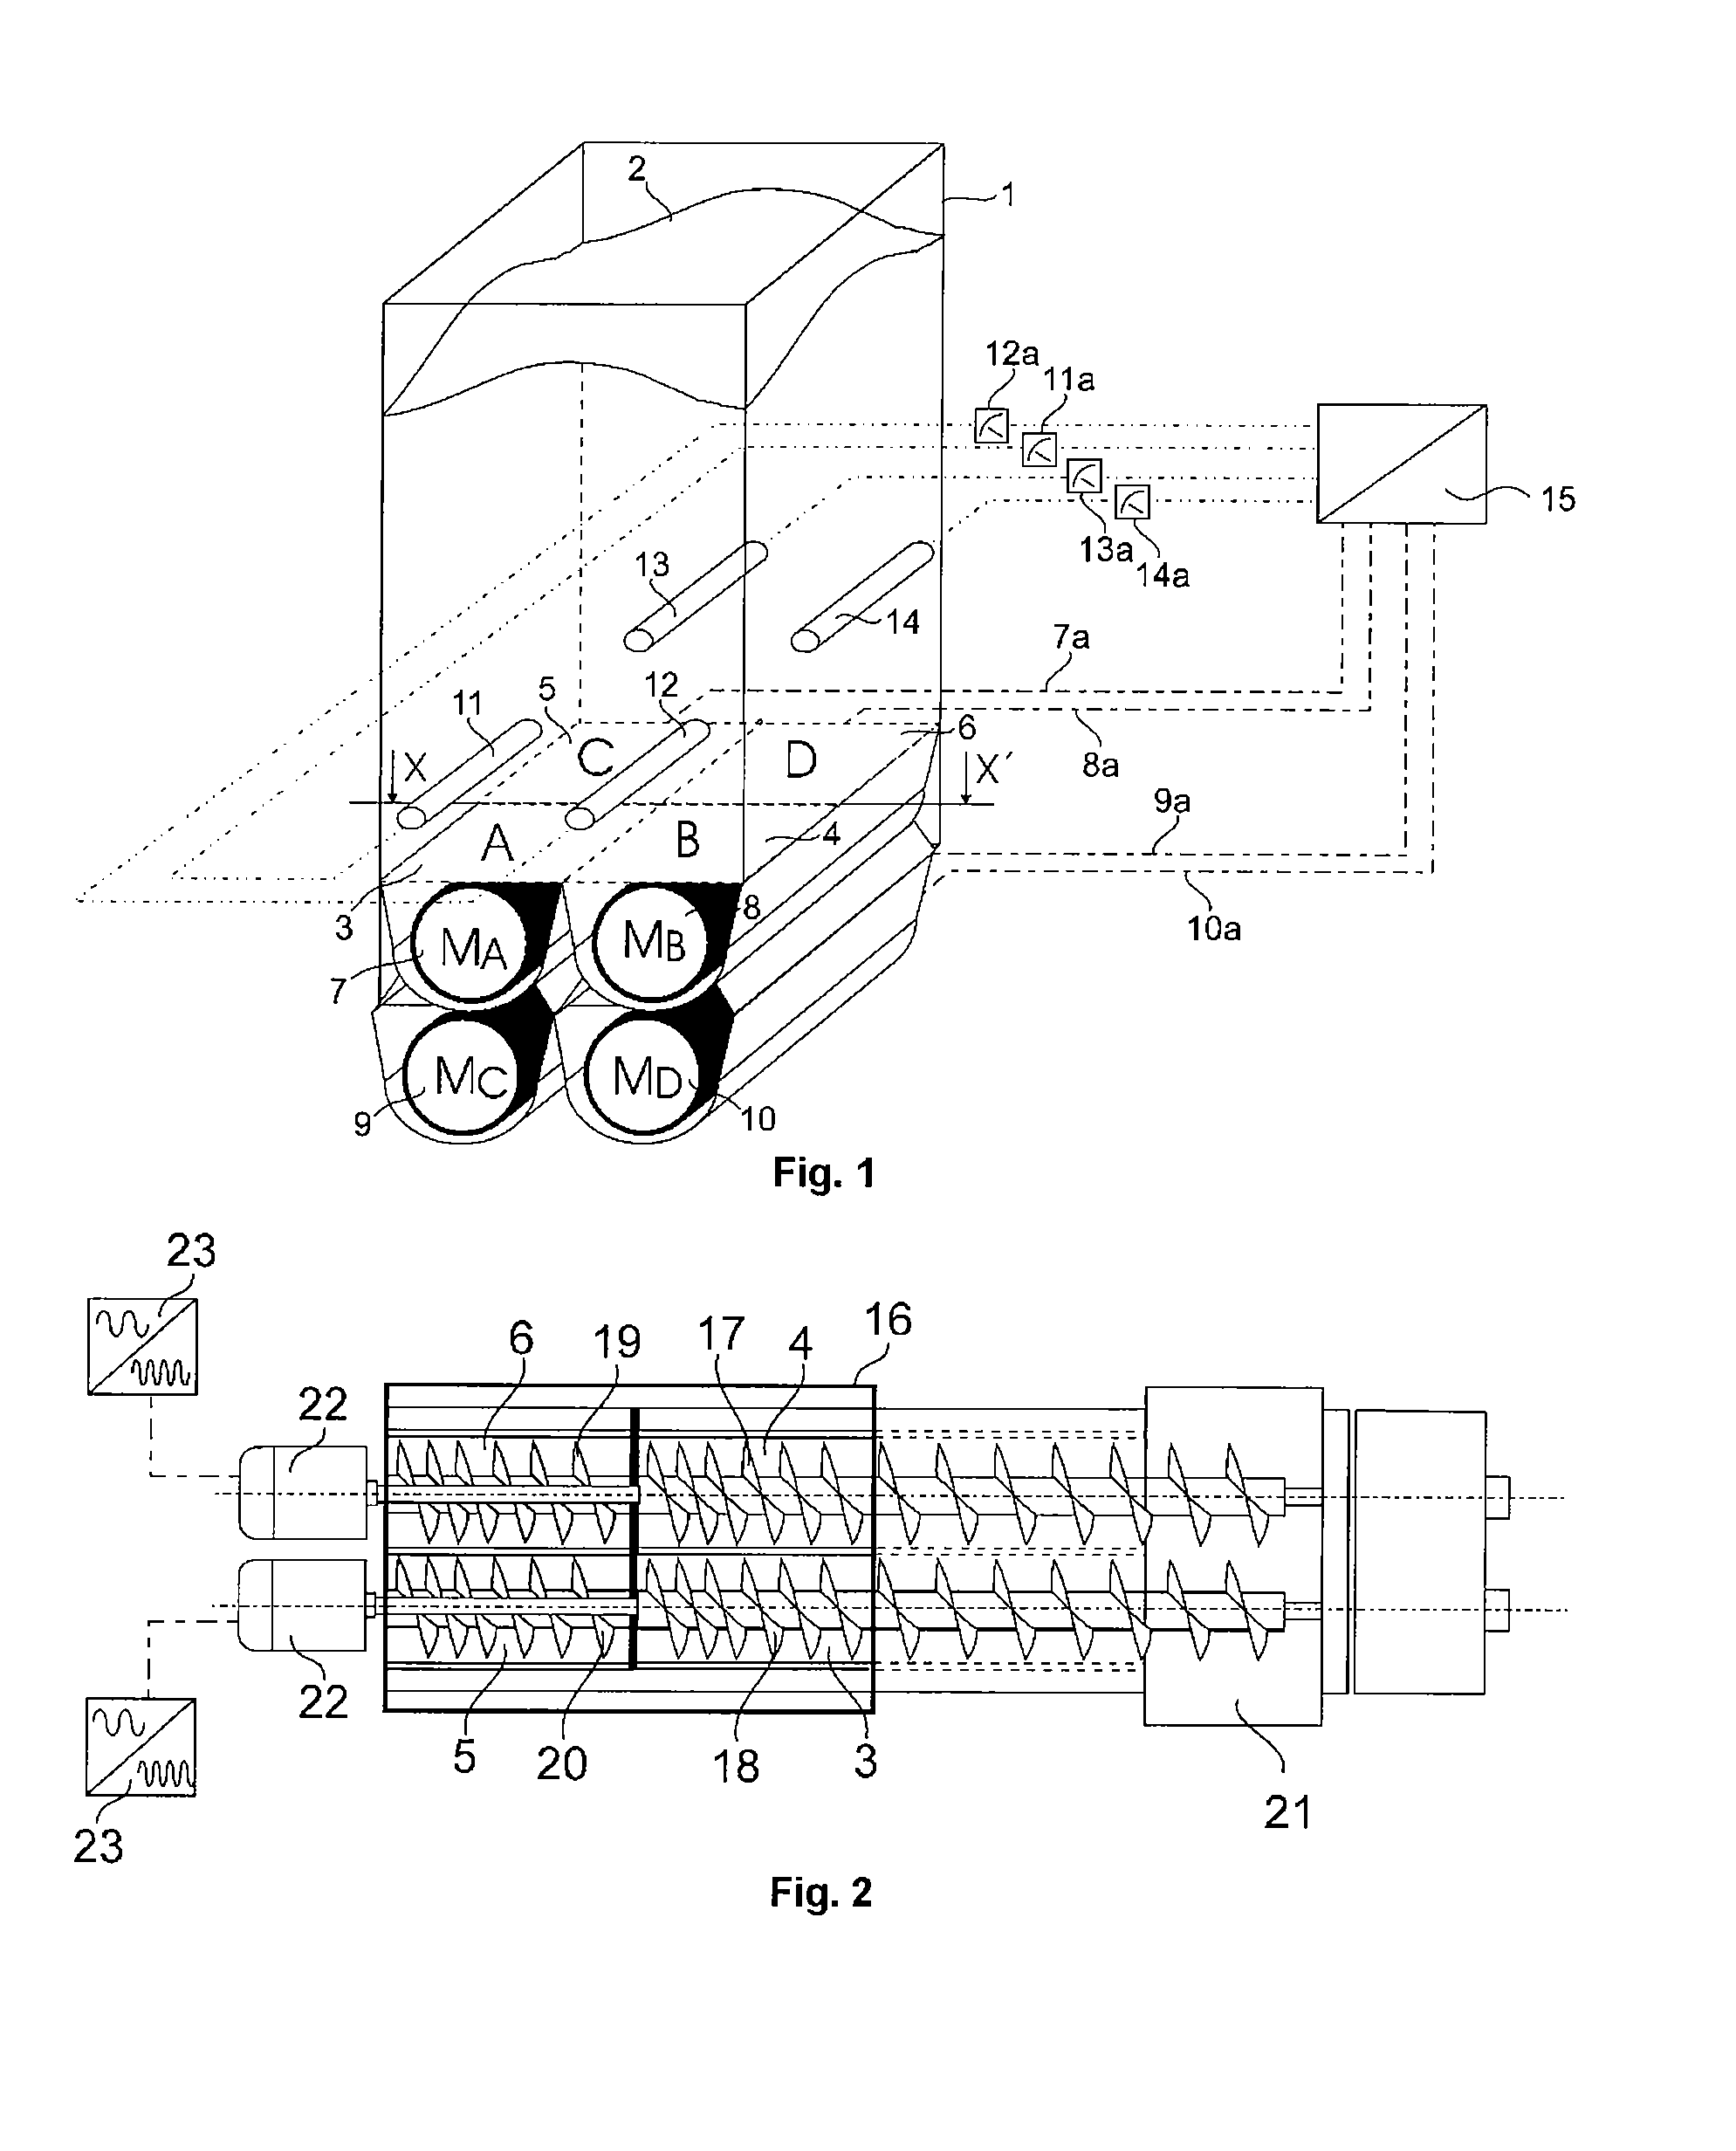 Method and Apparatus for the Continuous Controlled Discharge of Solids